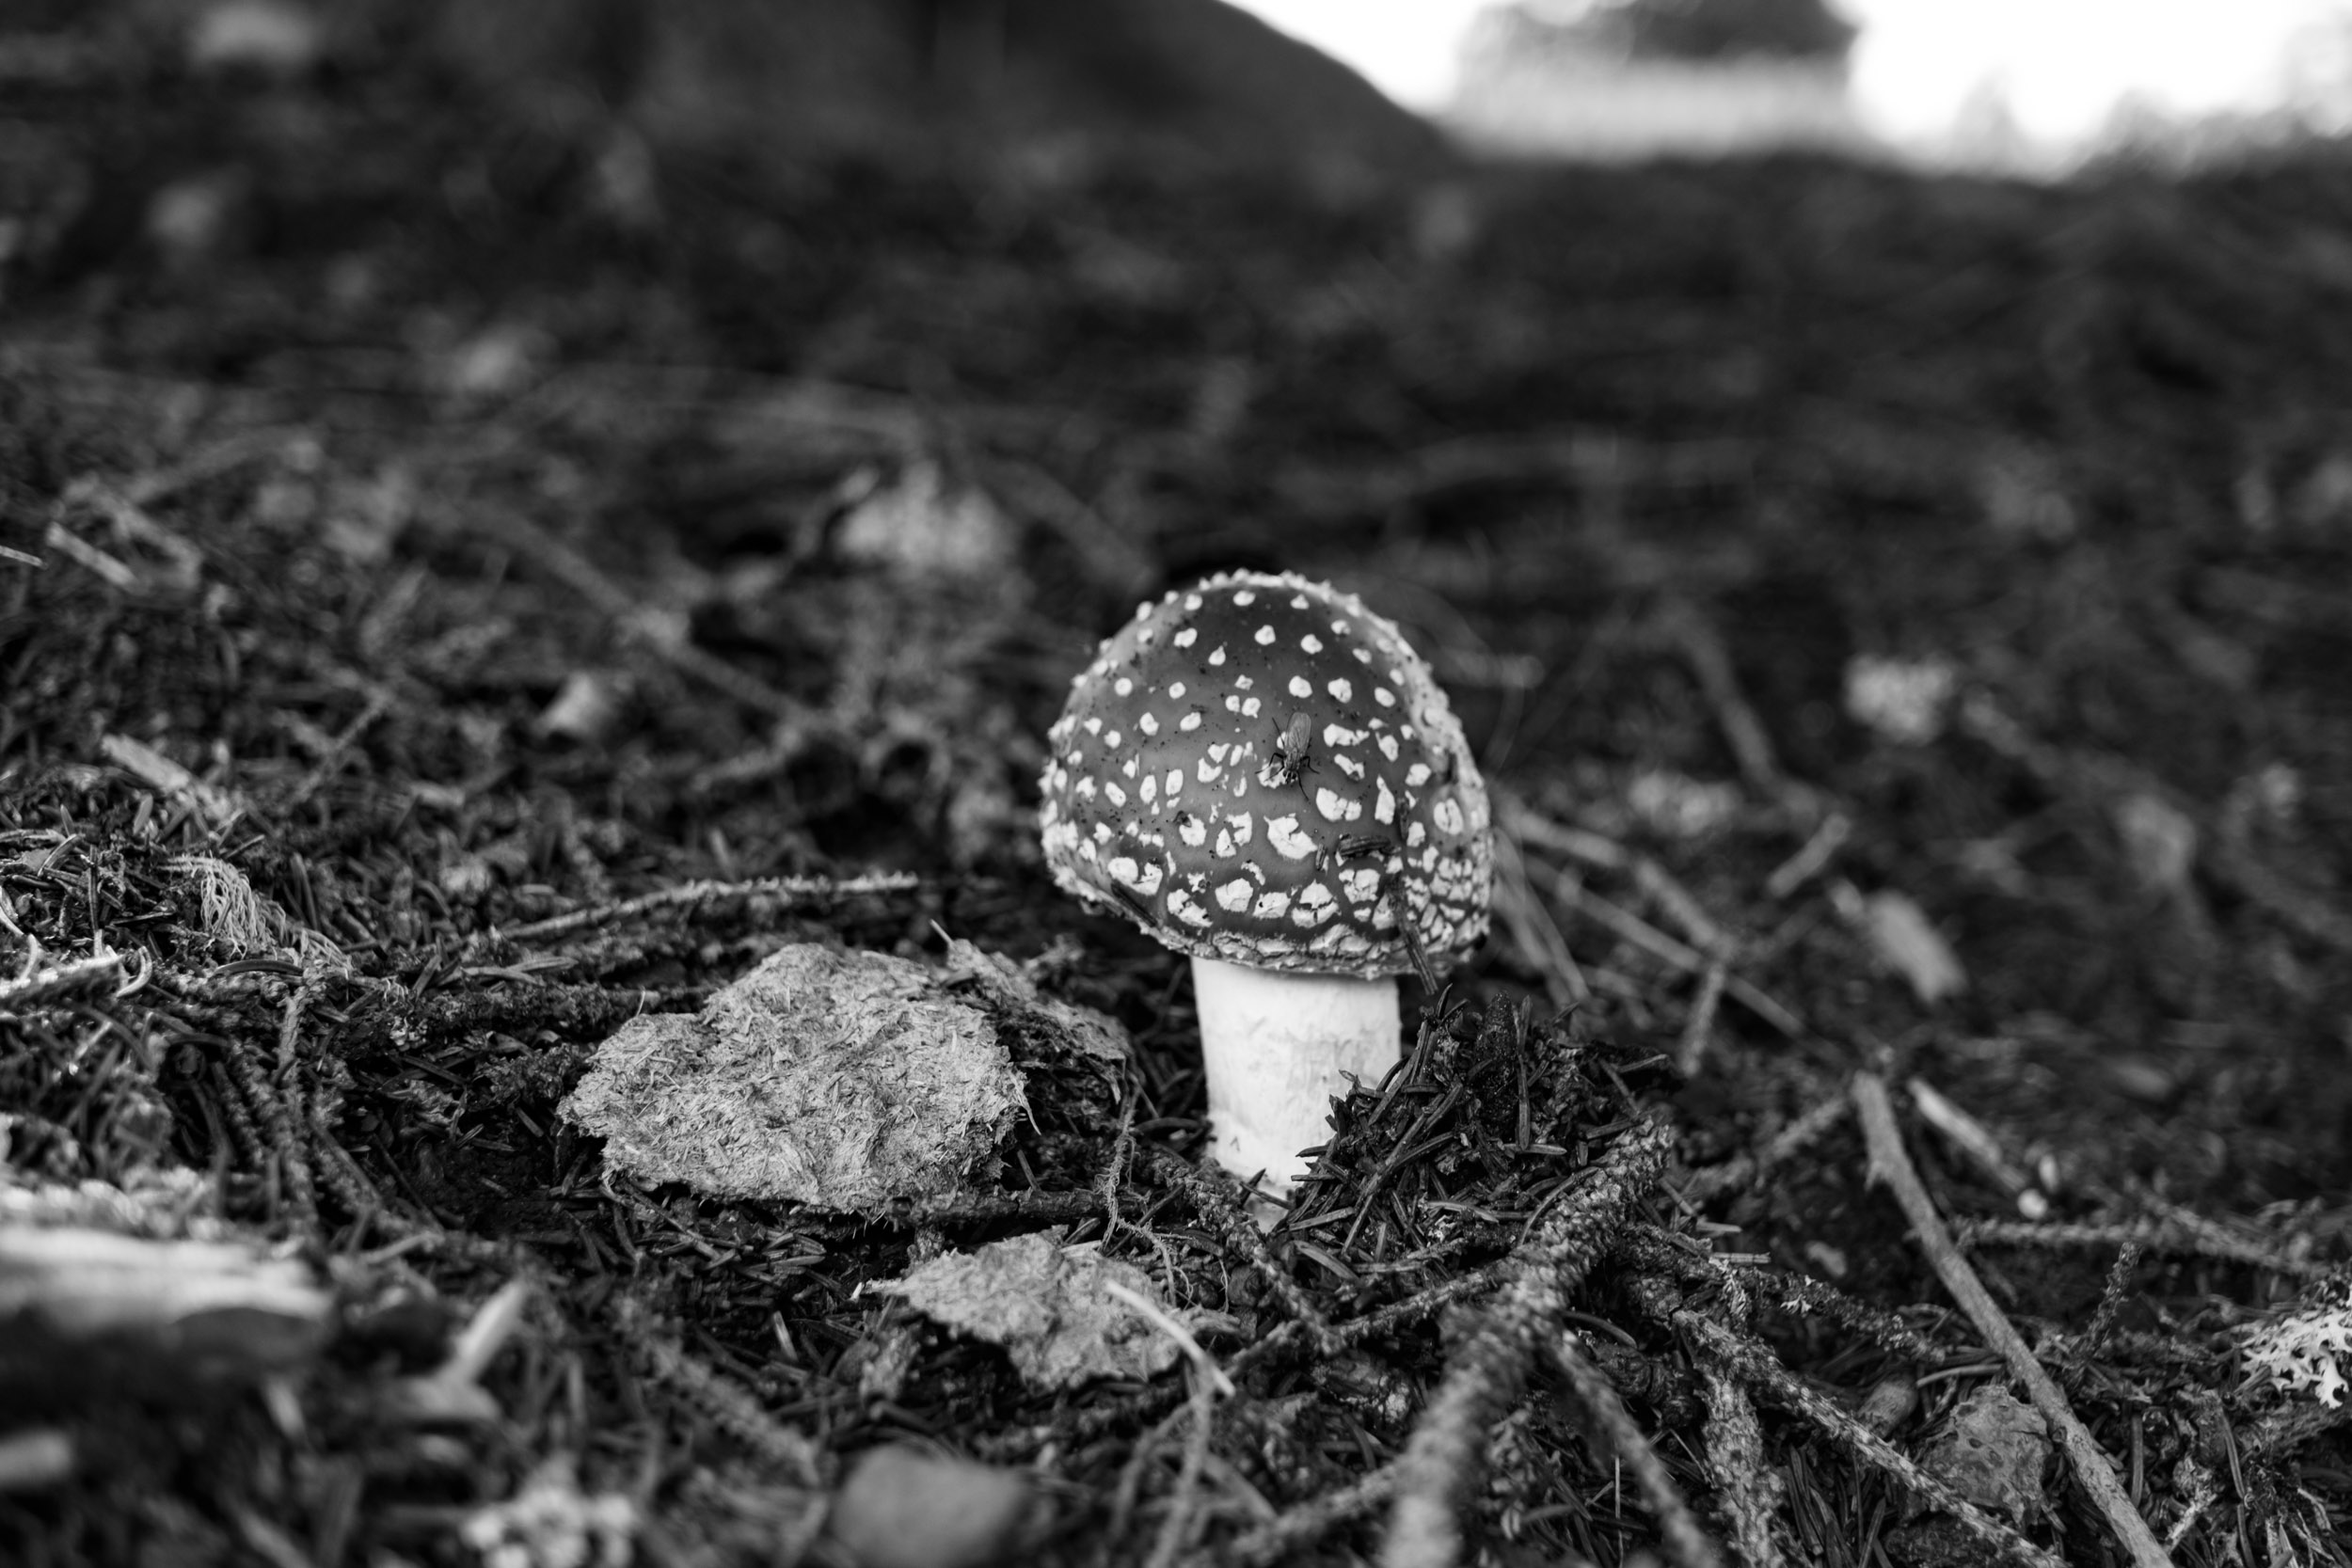 A toadstool – Amanita Muscaria or Fliegenpilz – that we saw on one of our hikes last weekend.